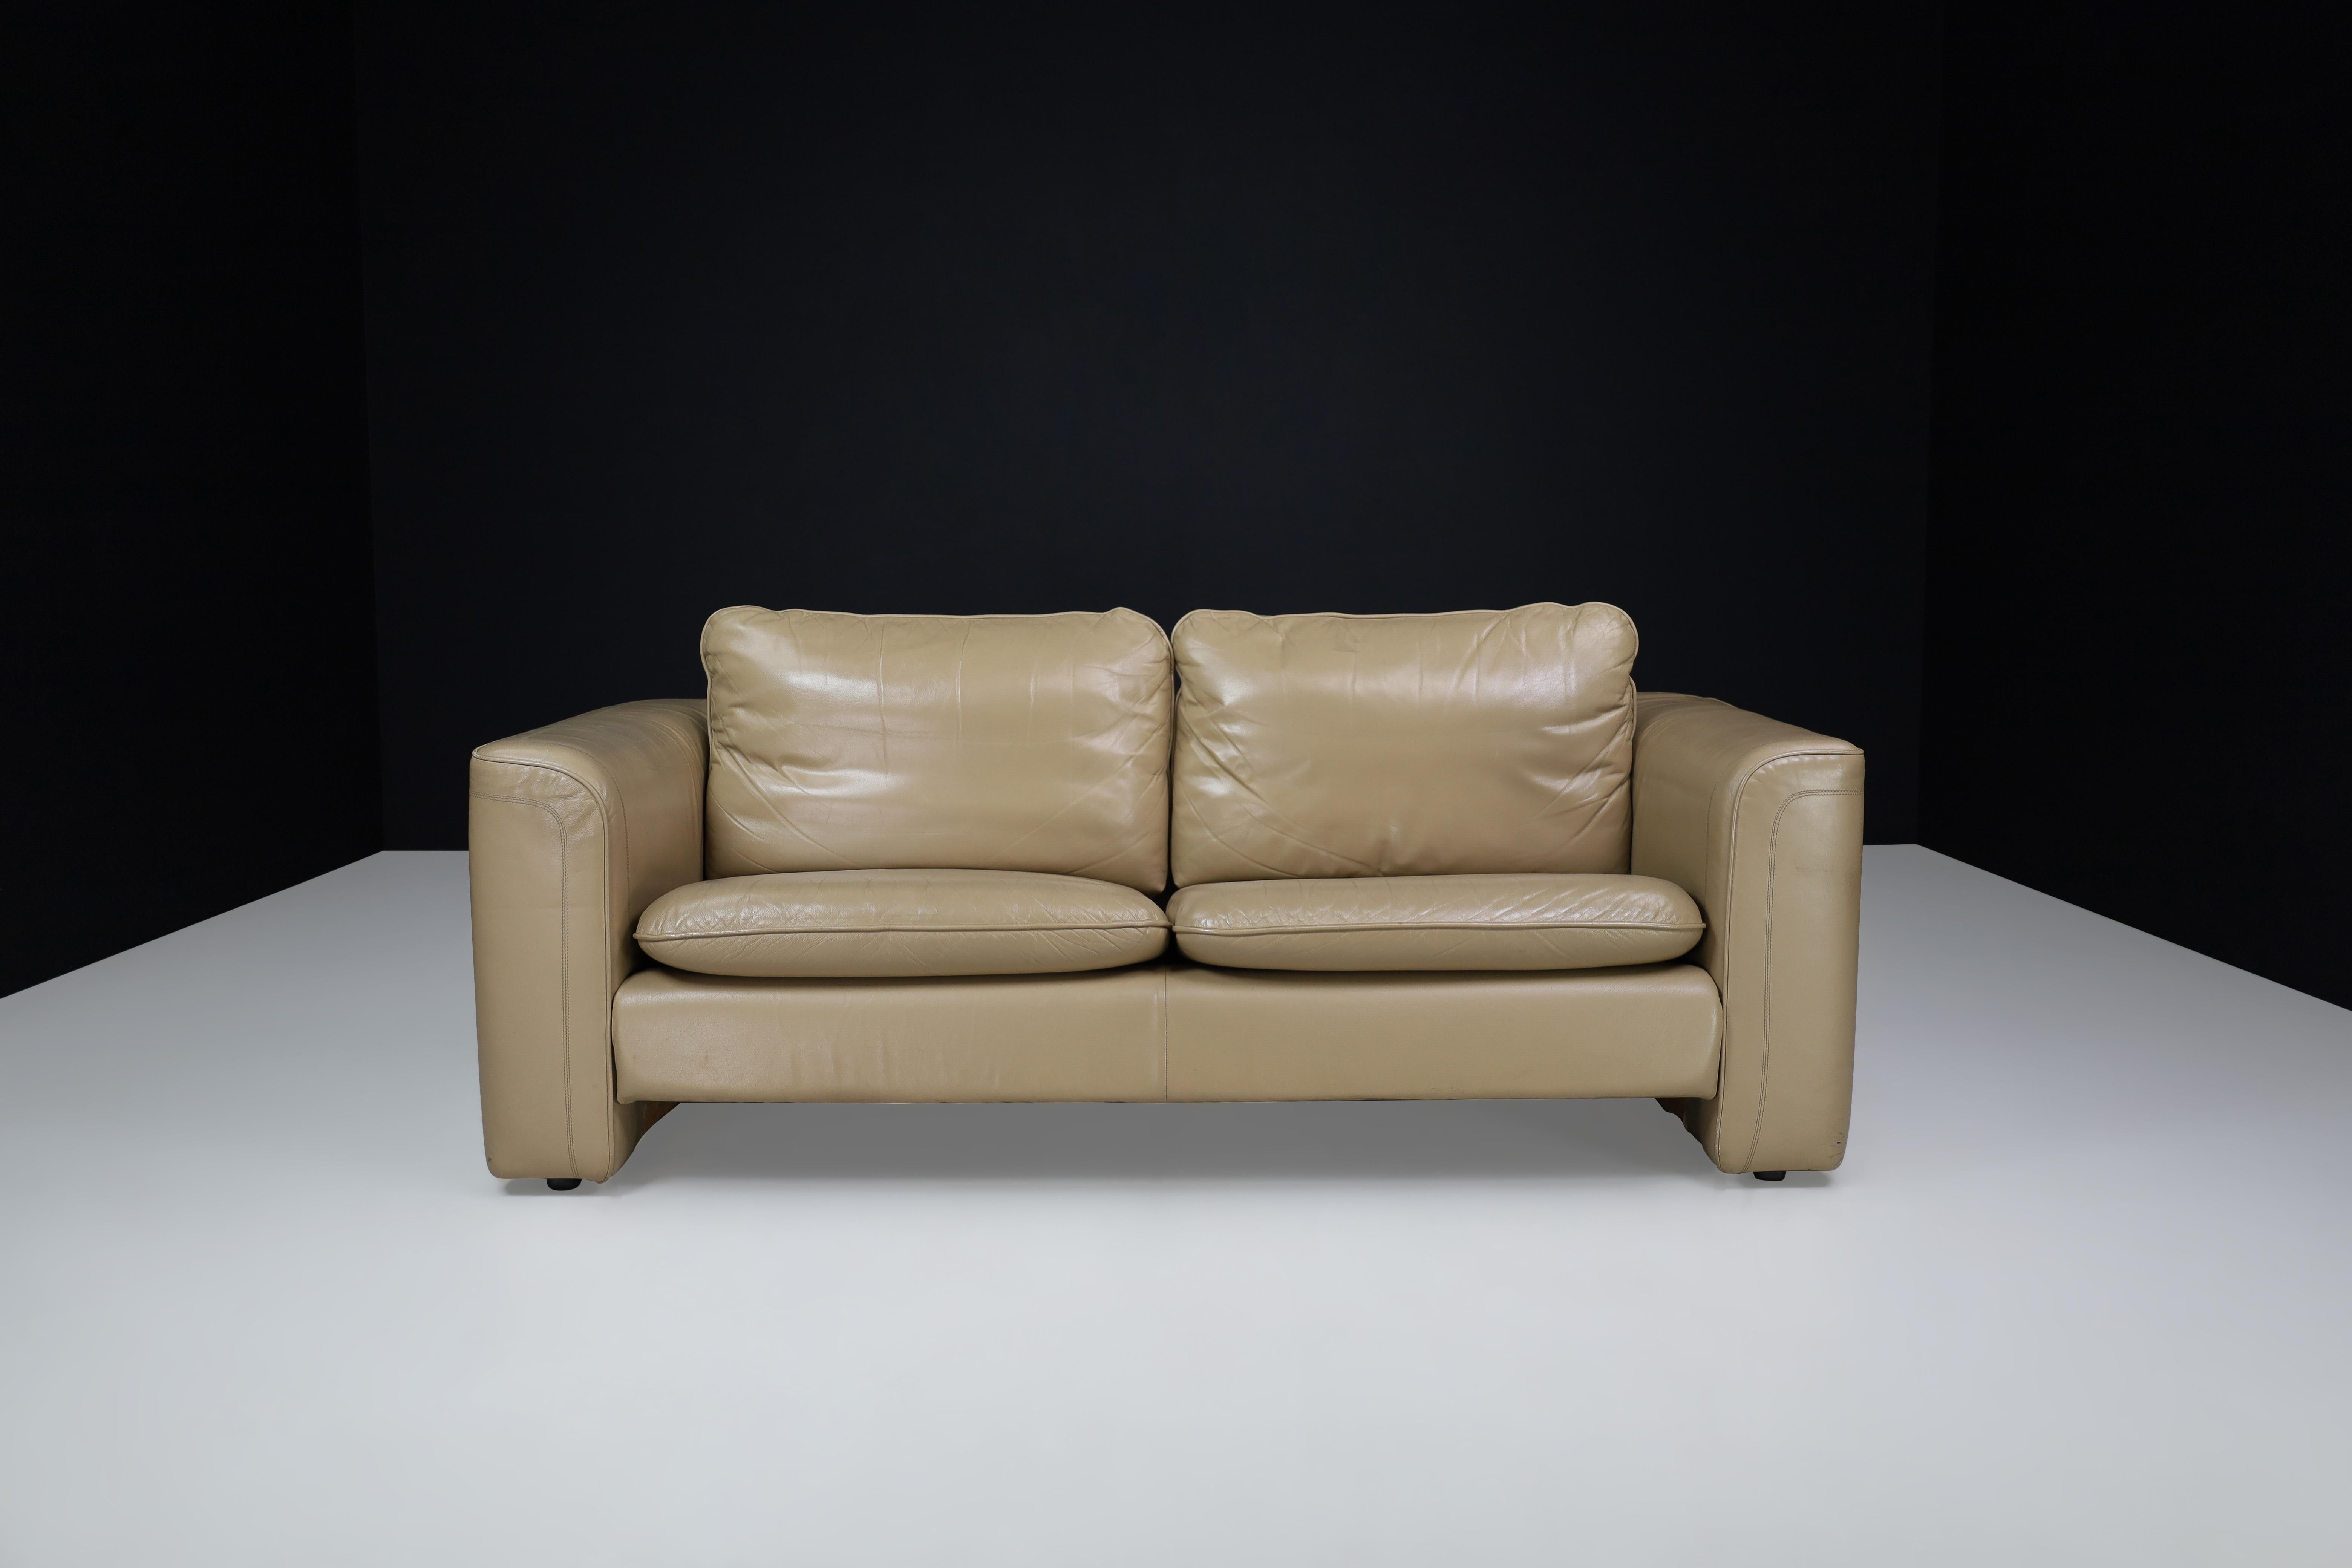 1980 couch